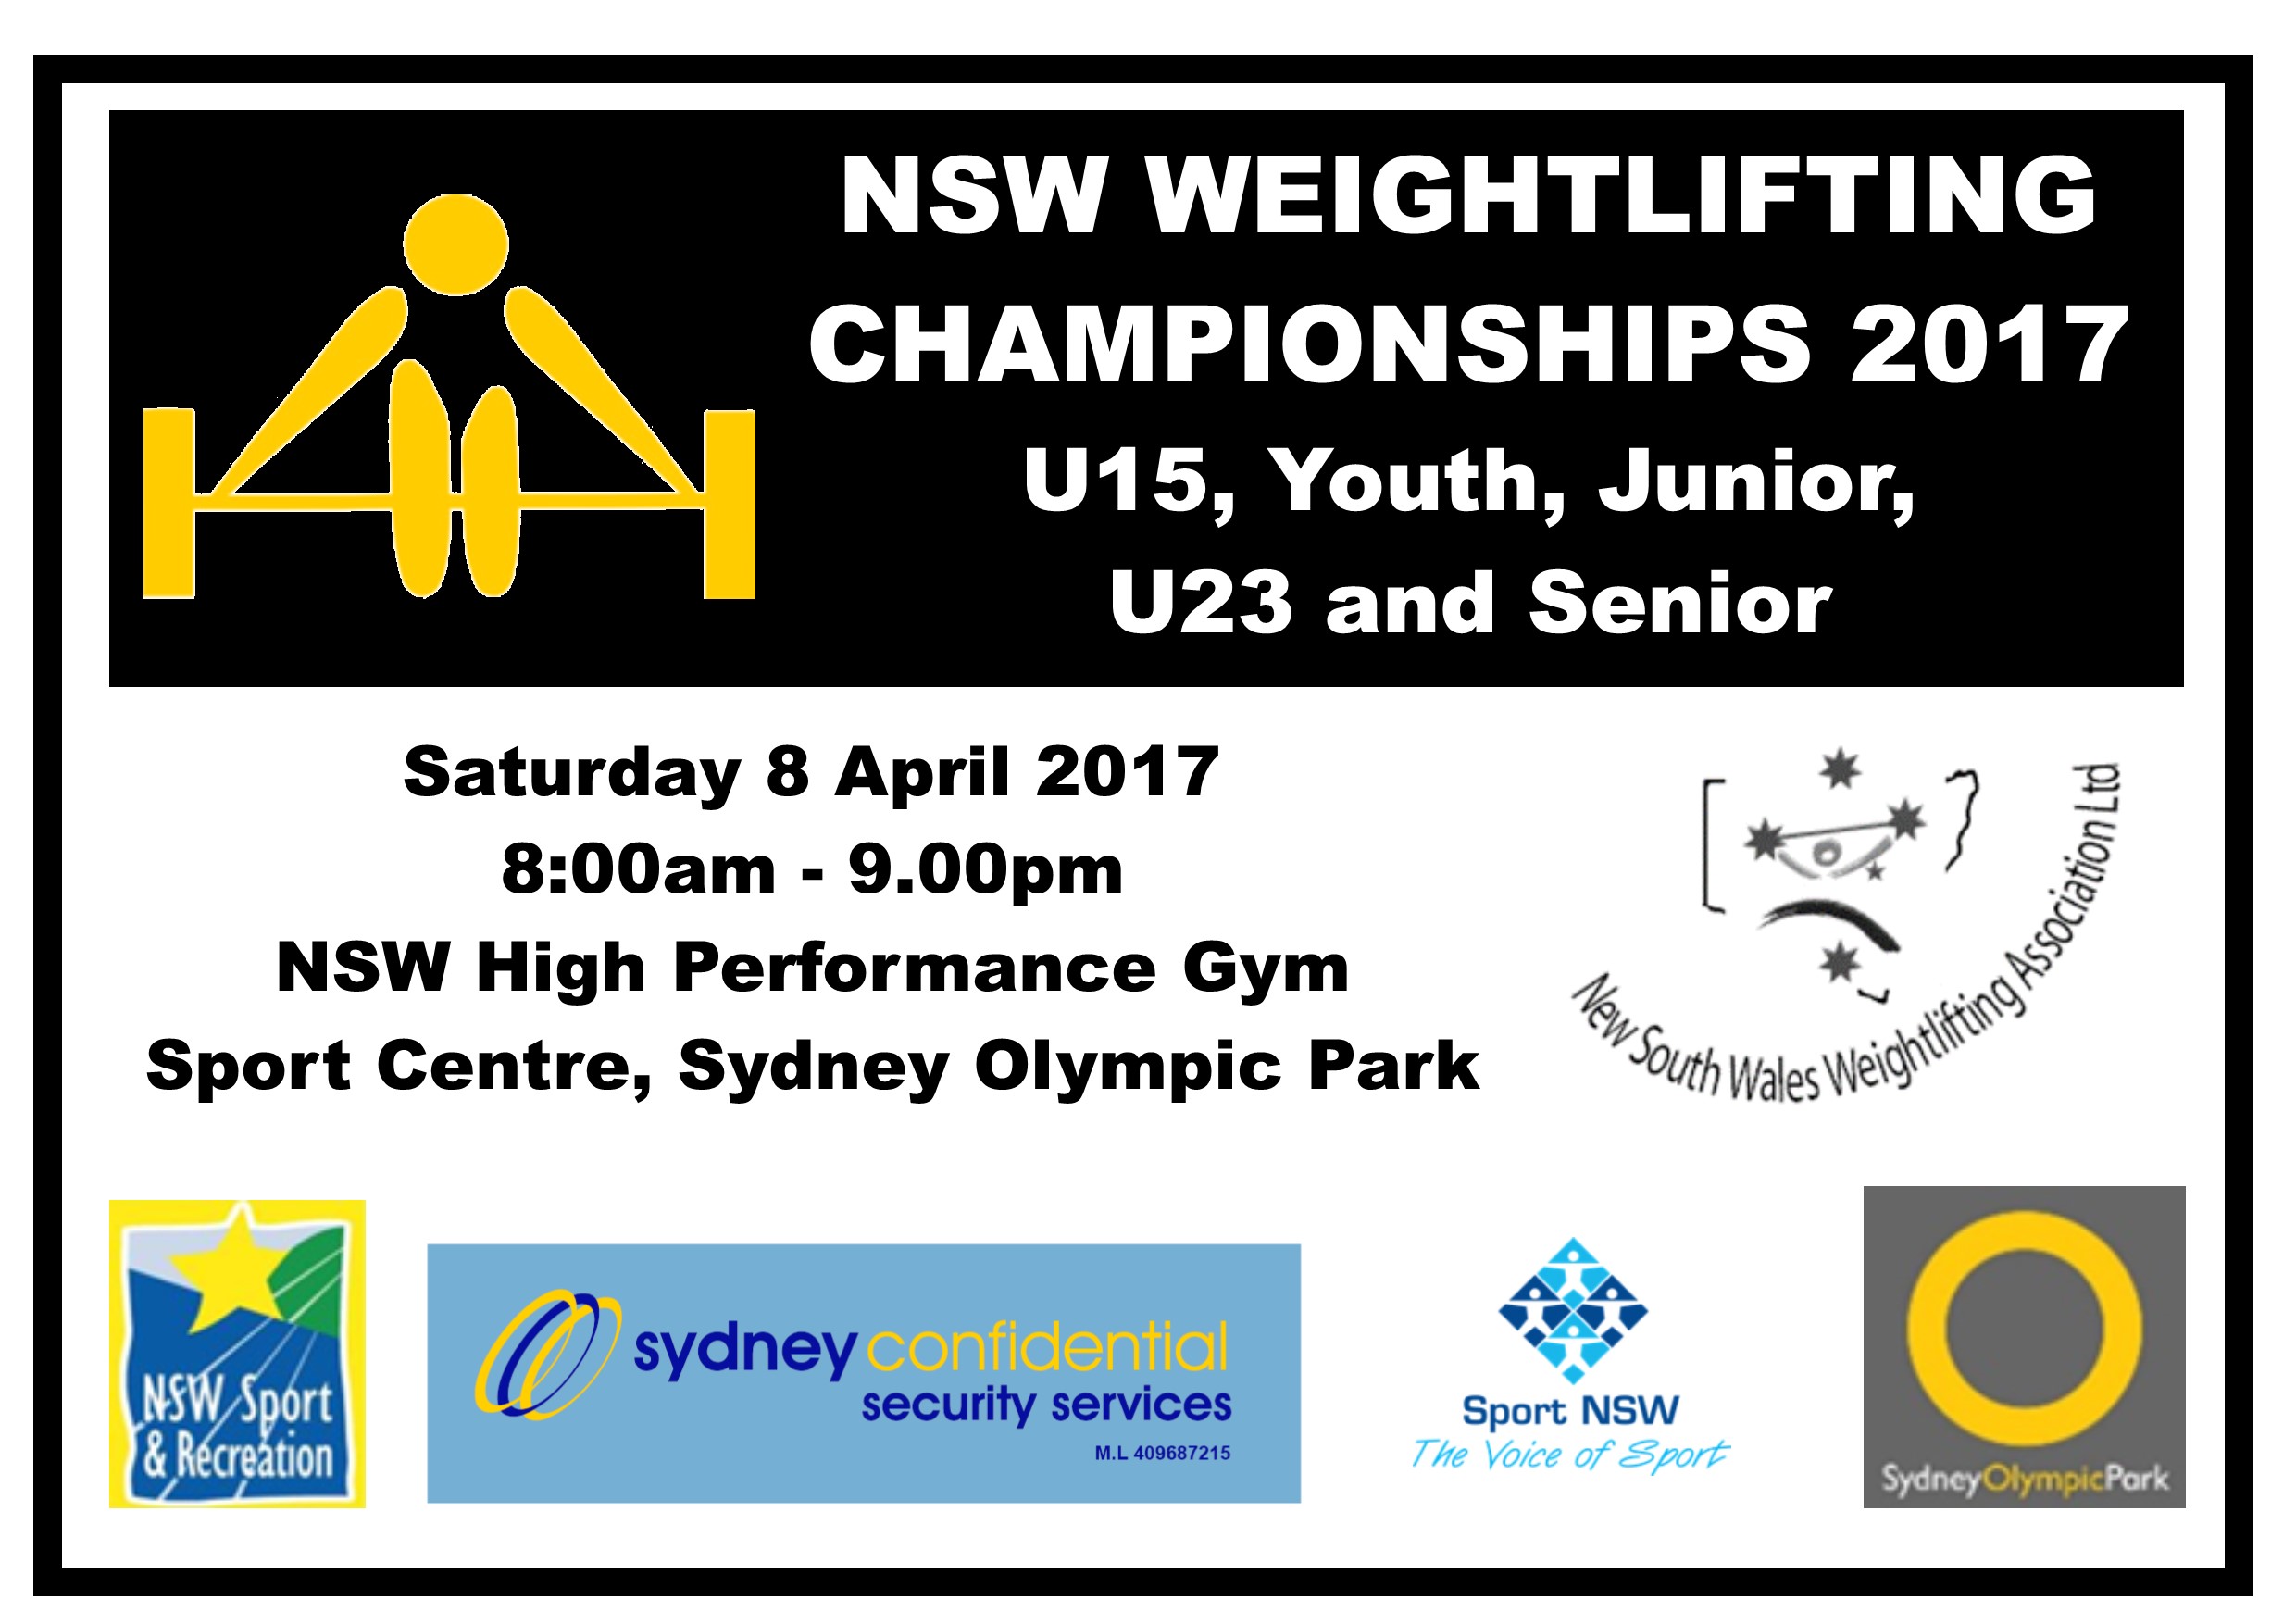 2017 NSW Weightlifting State Championships Draft Schedule